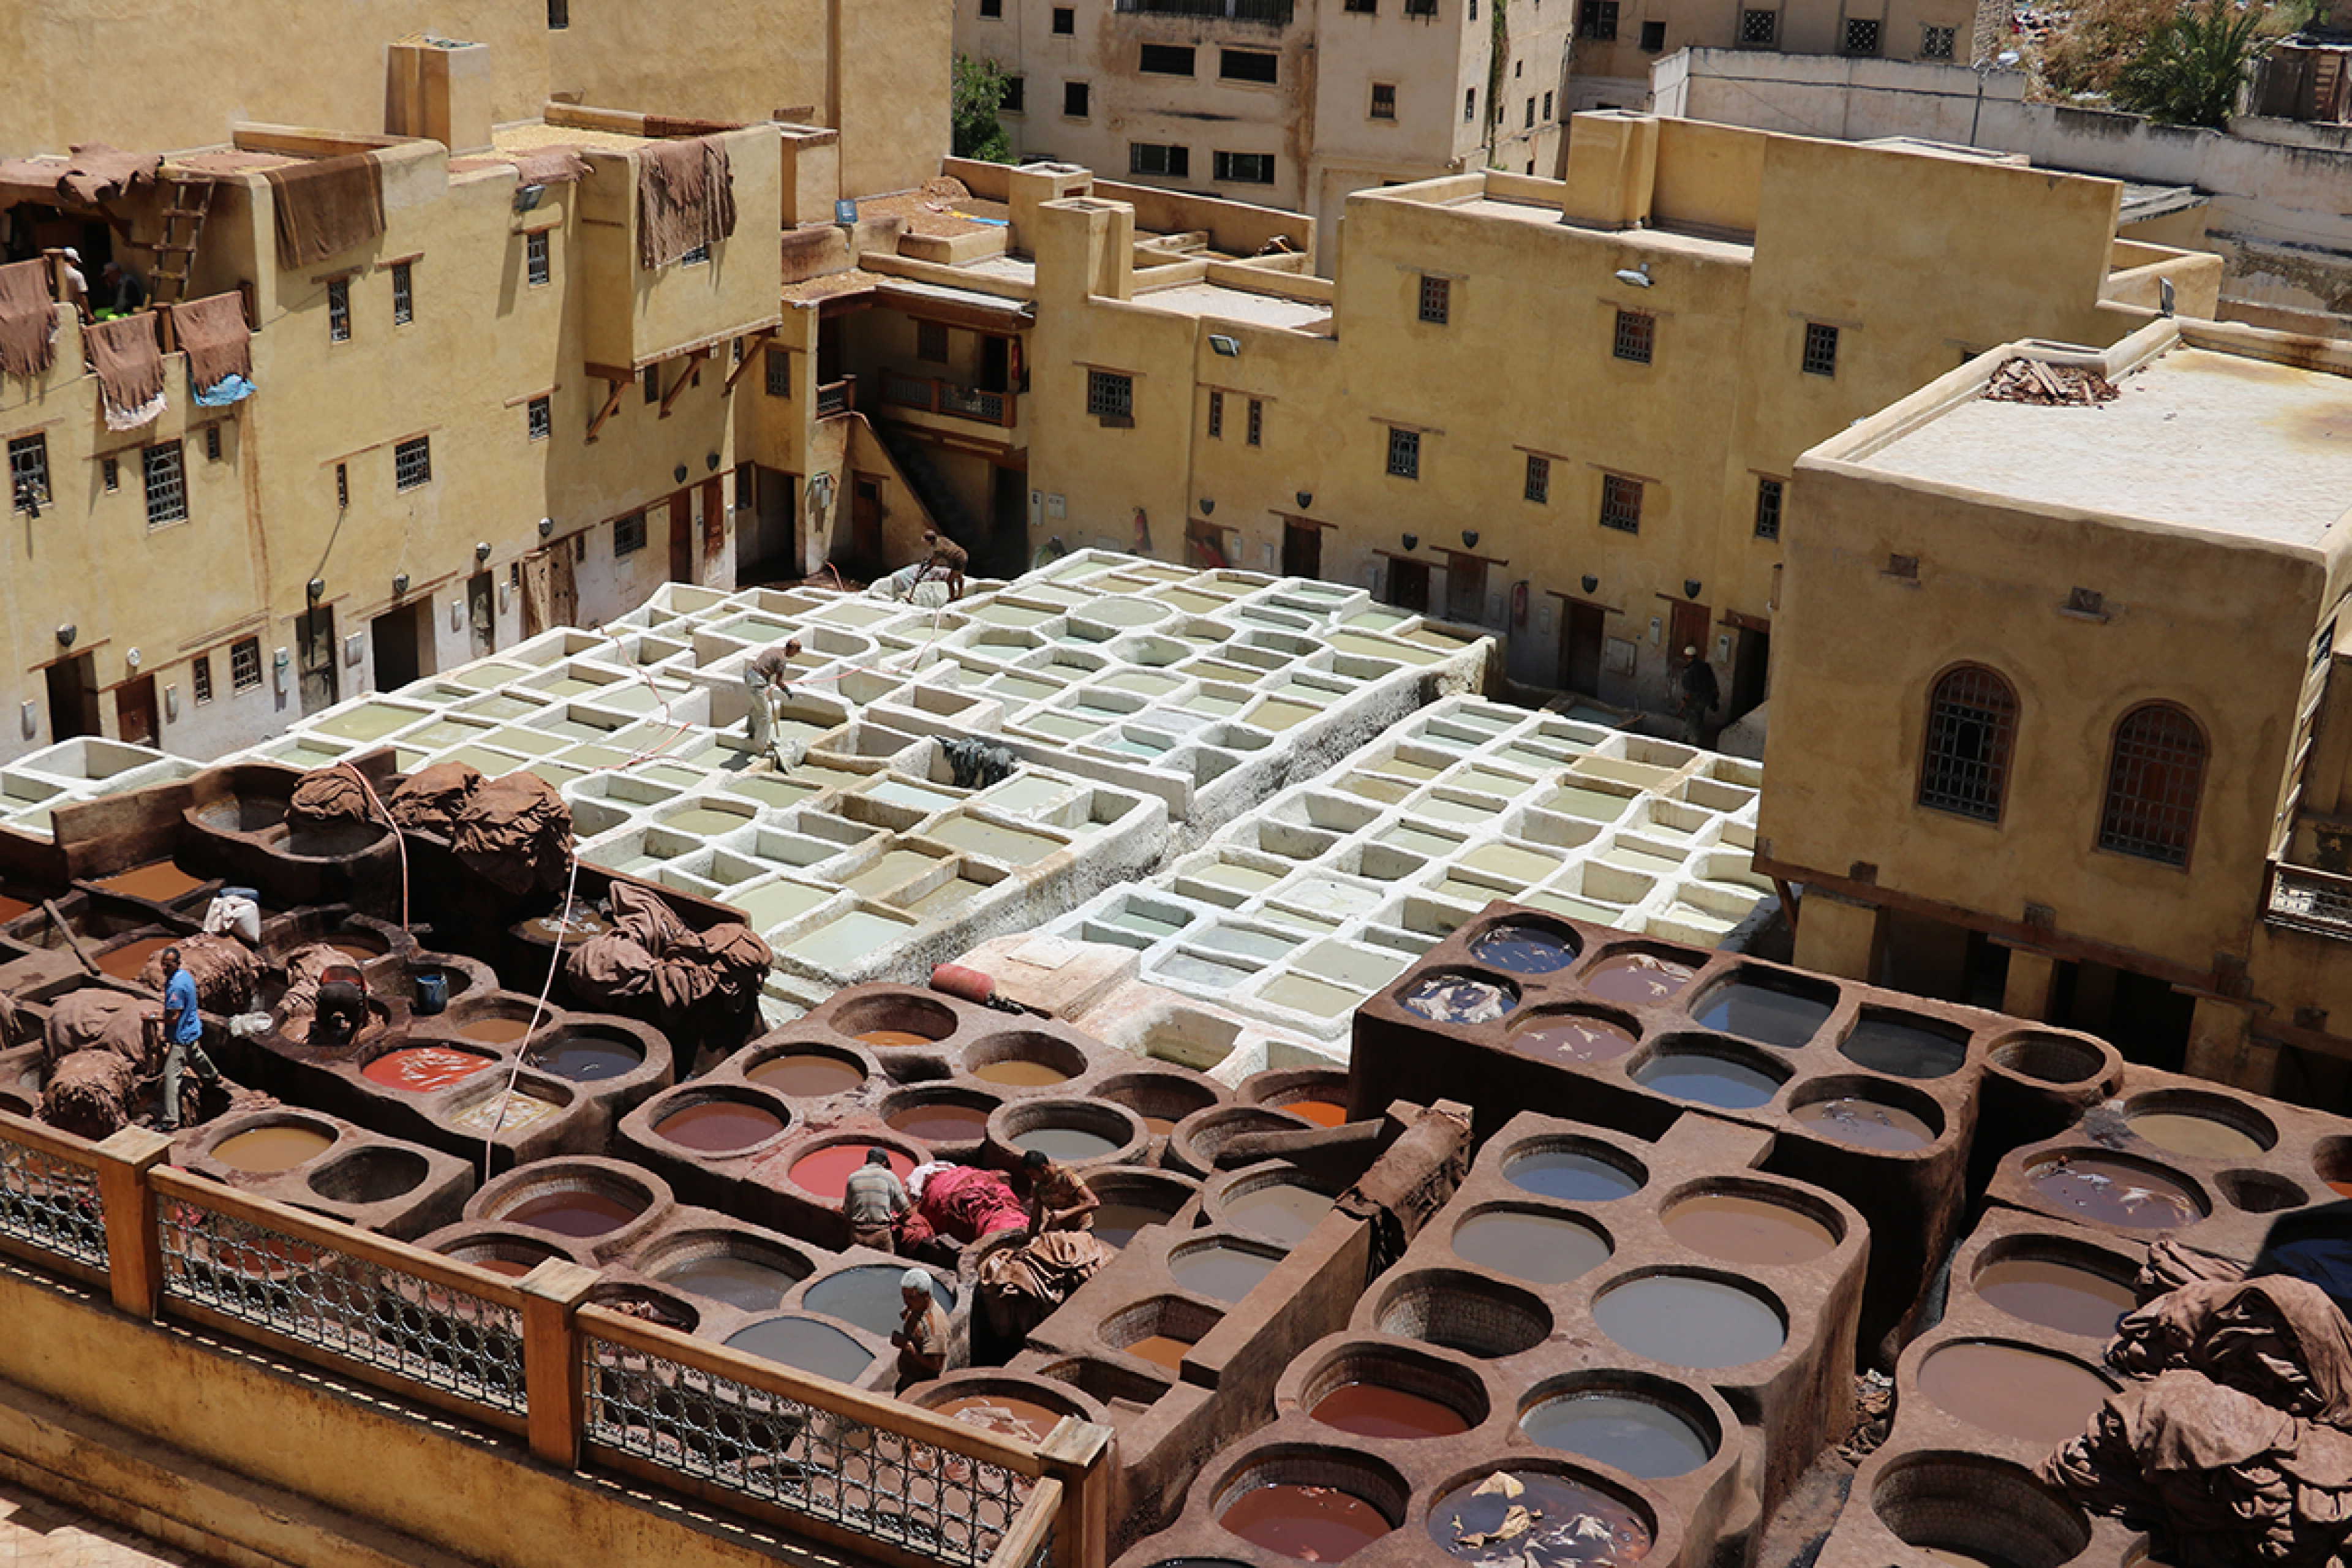 tannery tanks in fez morocco seen from above